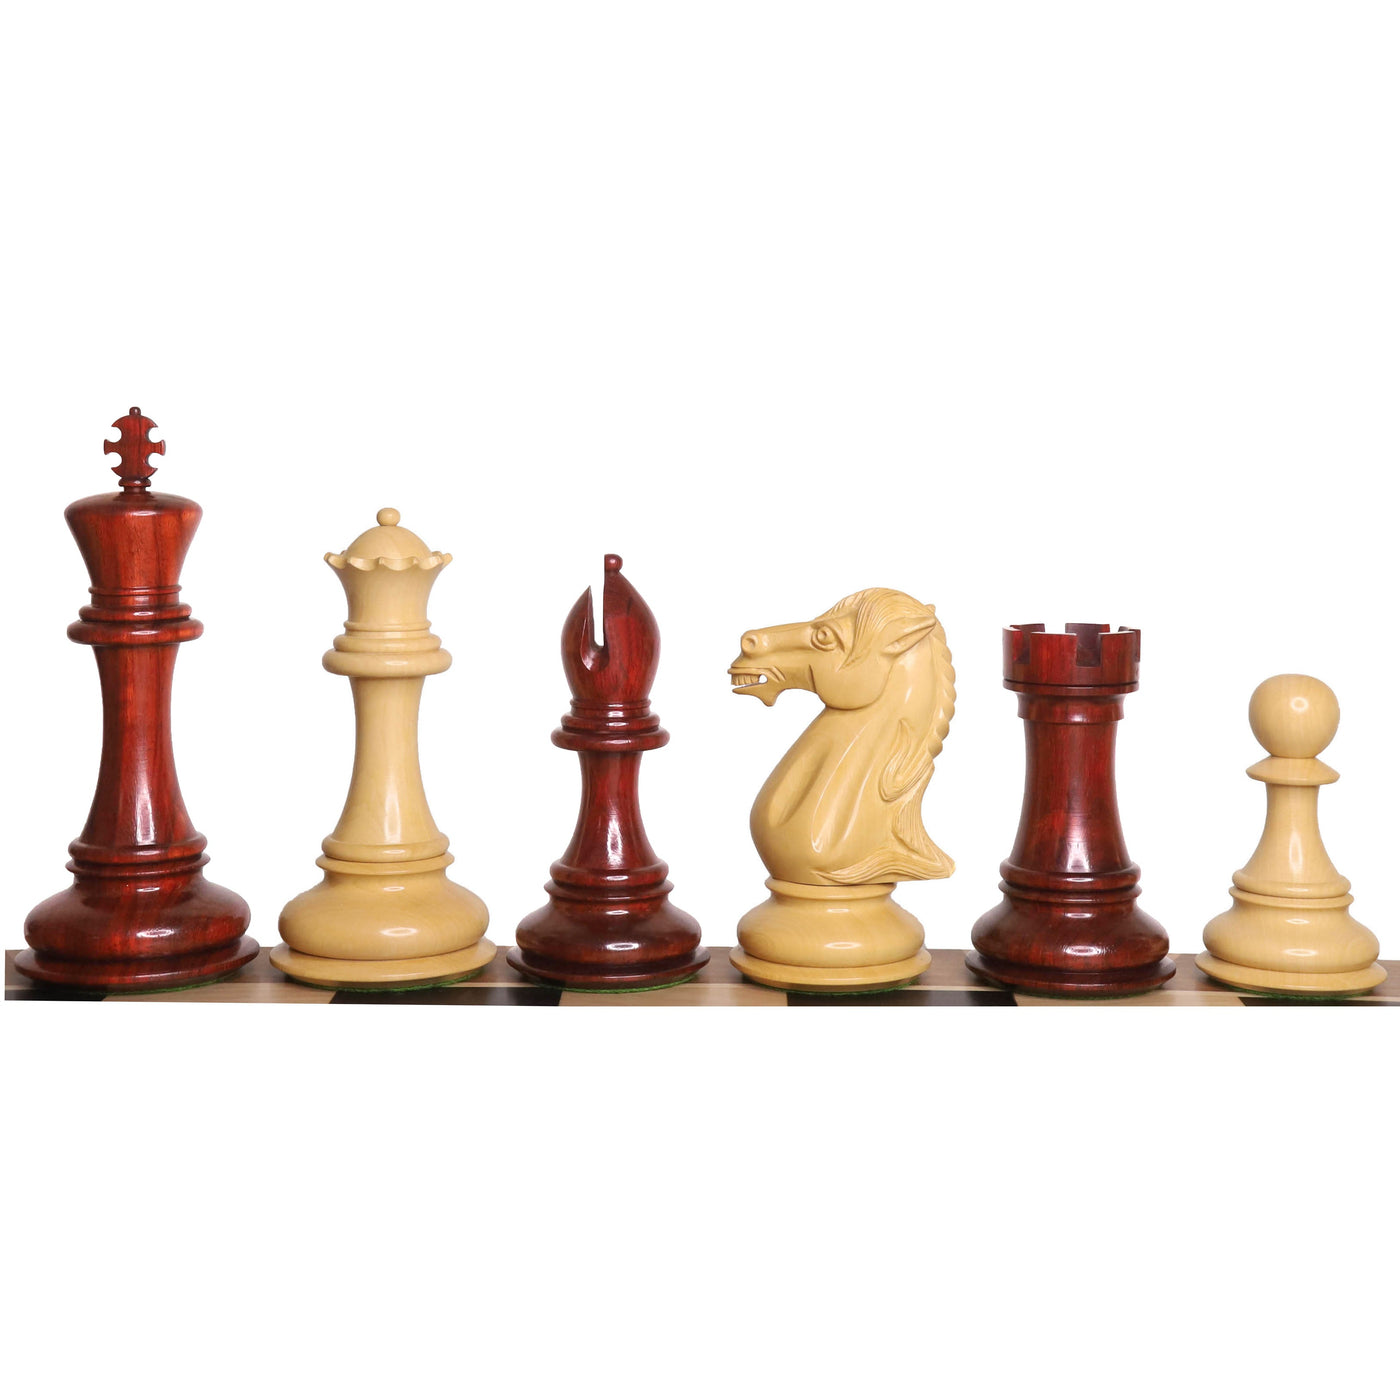 6.1" Mammoth Luxury Staunton Chess Set - Chess Pieces Only - Bud Rosewood -Triple Weight